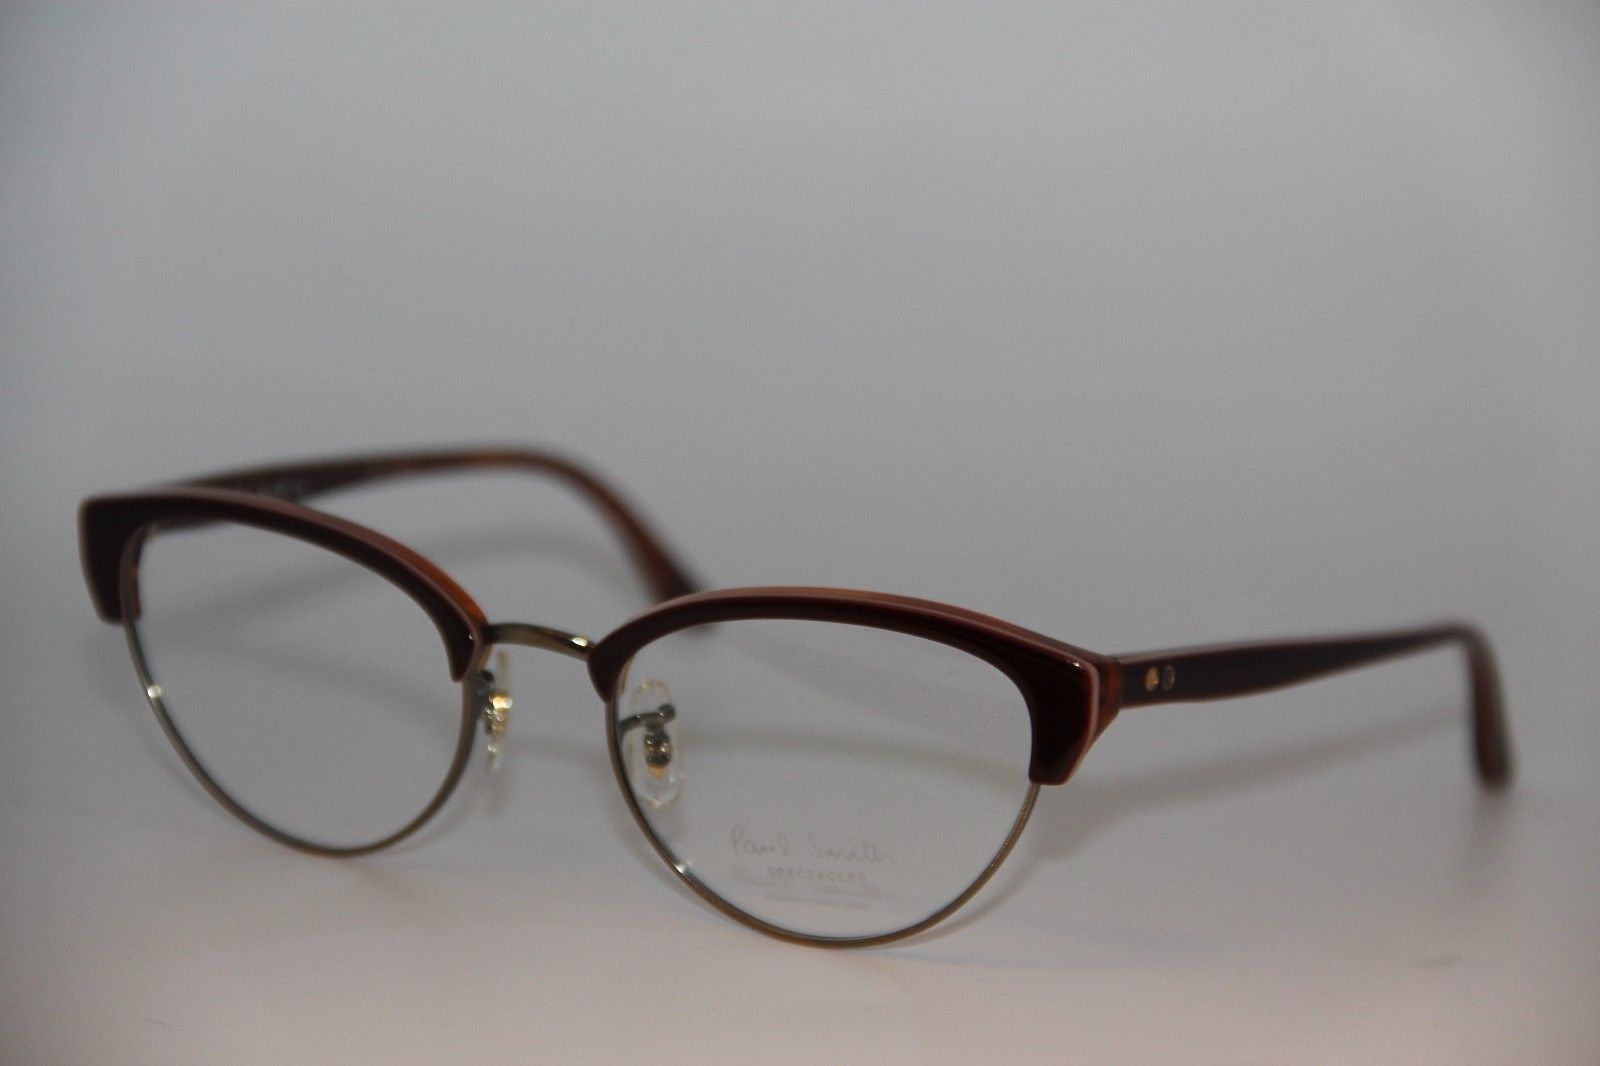 NEW PAUL SMITH PM 8195 1289 HARLYN VIOLET EYEGLASSES AUTHENTIC RX PM8195 50-18 - $69.66